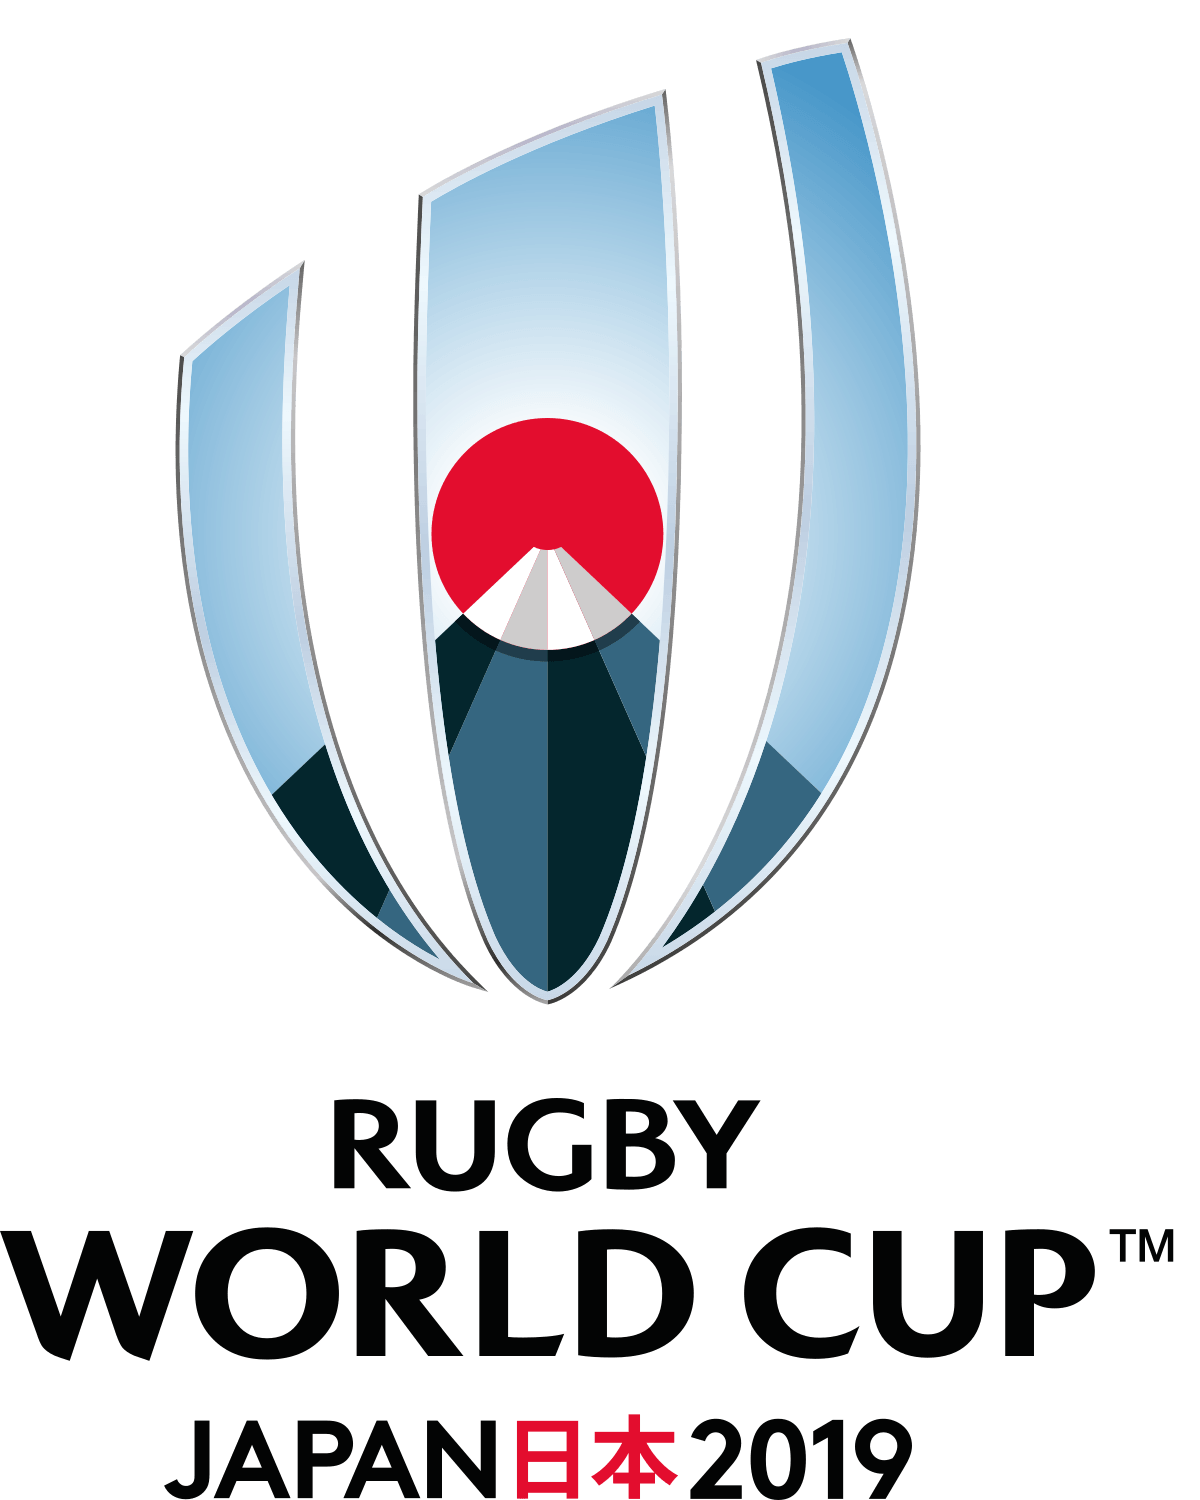 All about Rugby World Cup 2019. Rugby World Cup 2019